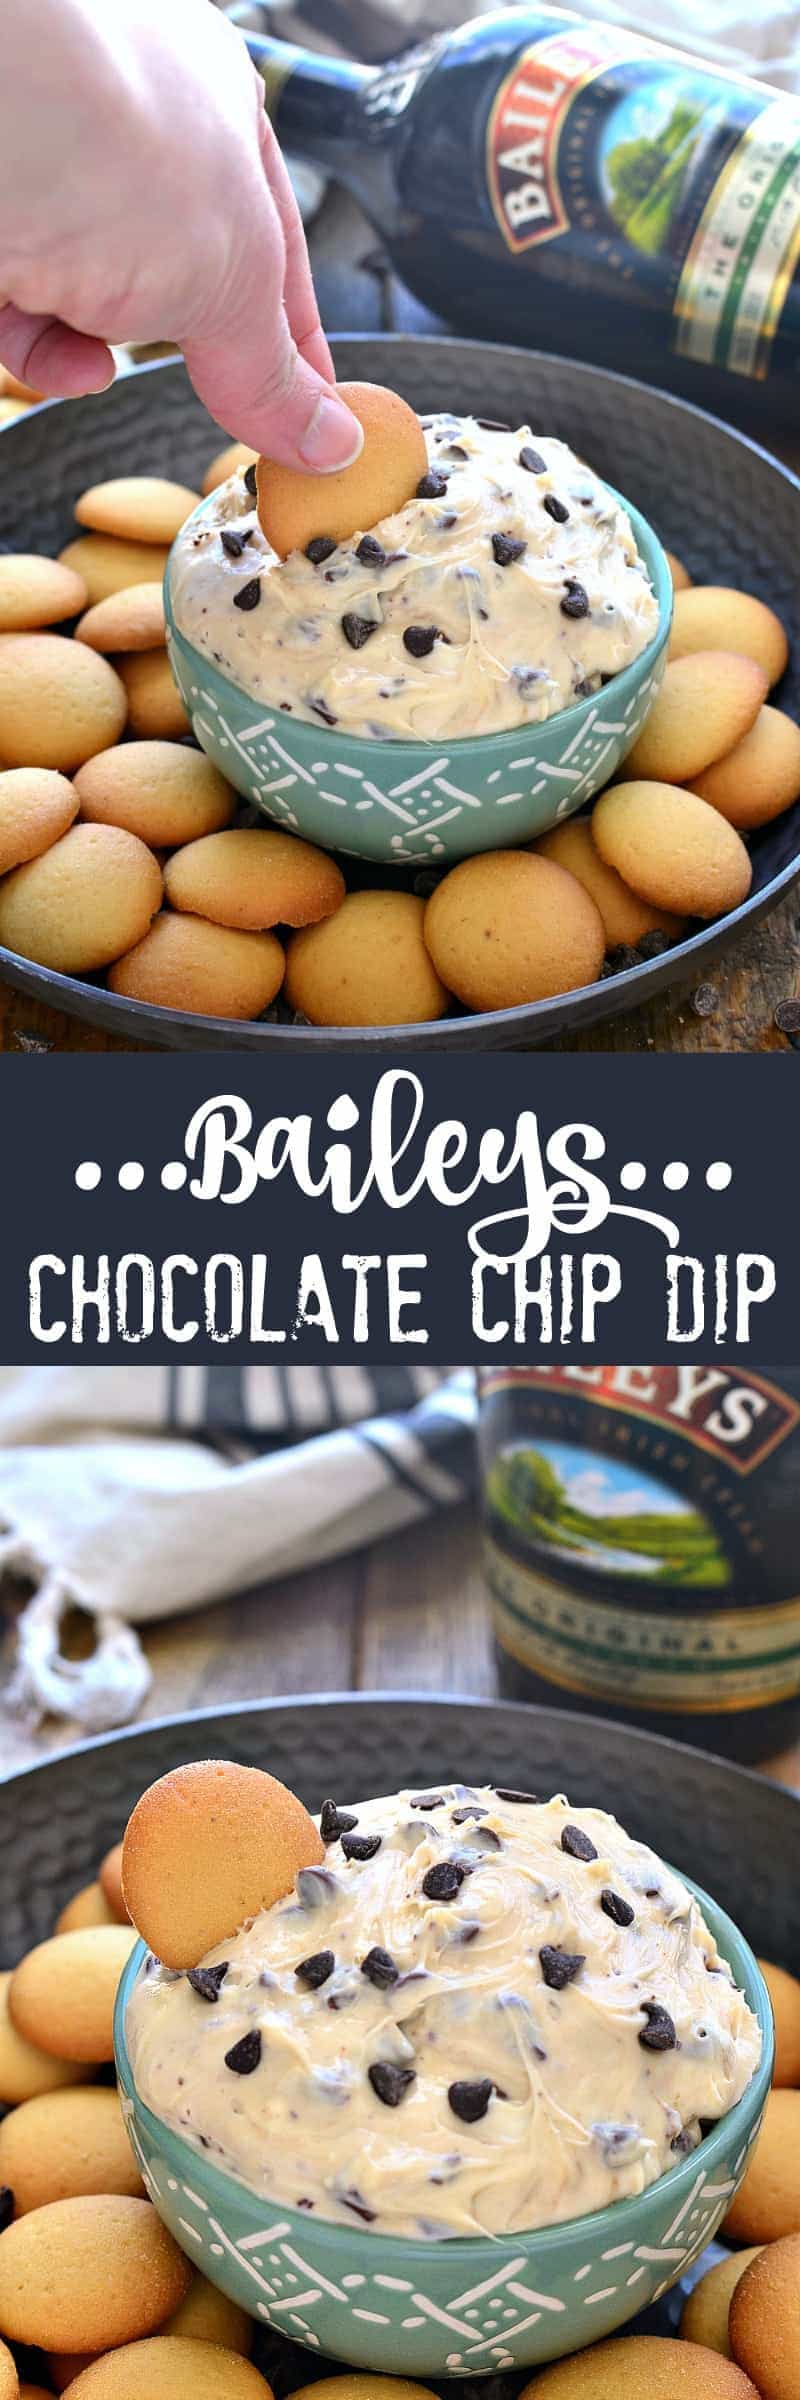 This Baileys Chocolate Chip Dip is sweet, creamy, and packed with the delicious taste of Baileys Irish Cream! Perfect for dipping cookies, fruit, or eating by the spoonful! 